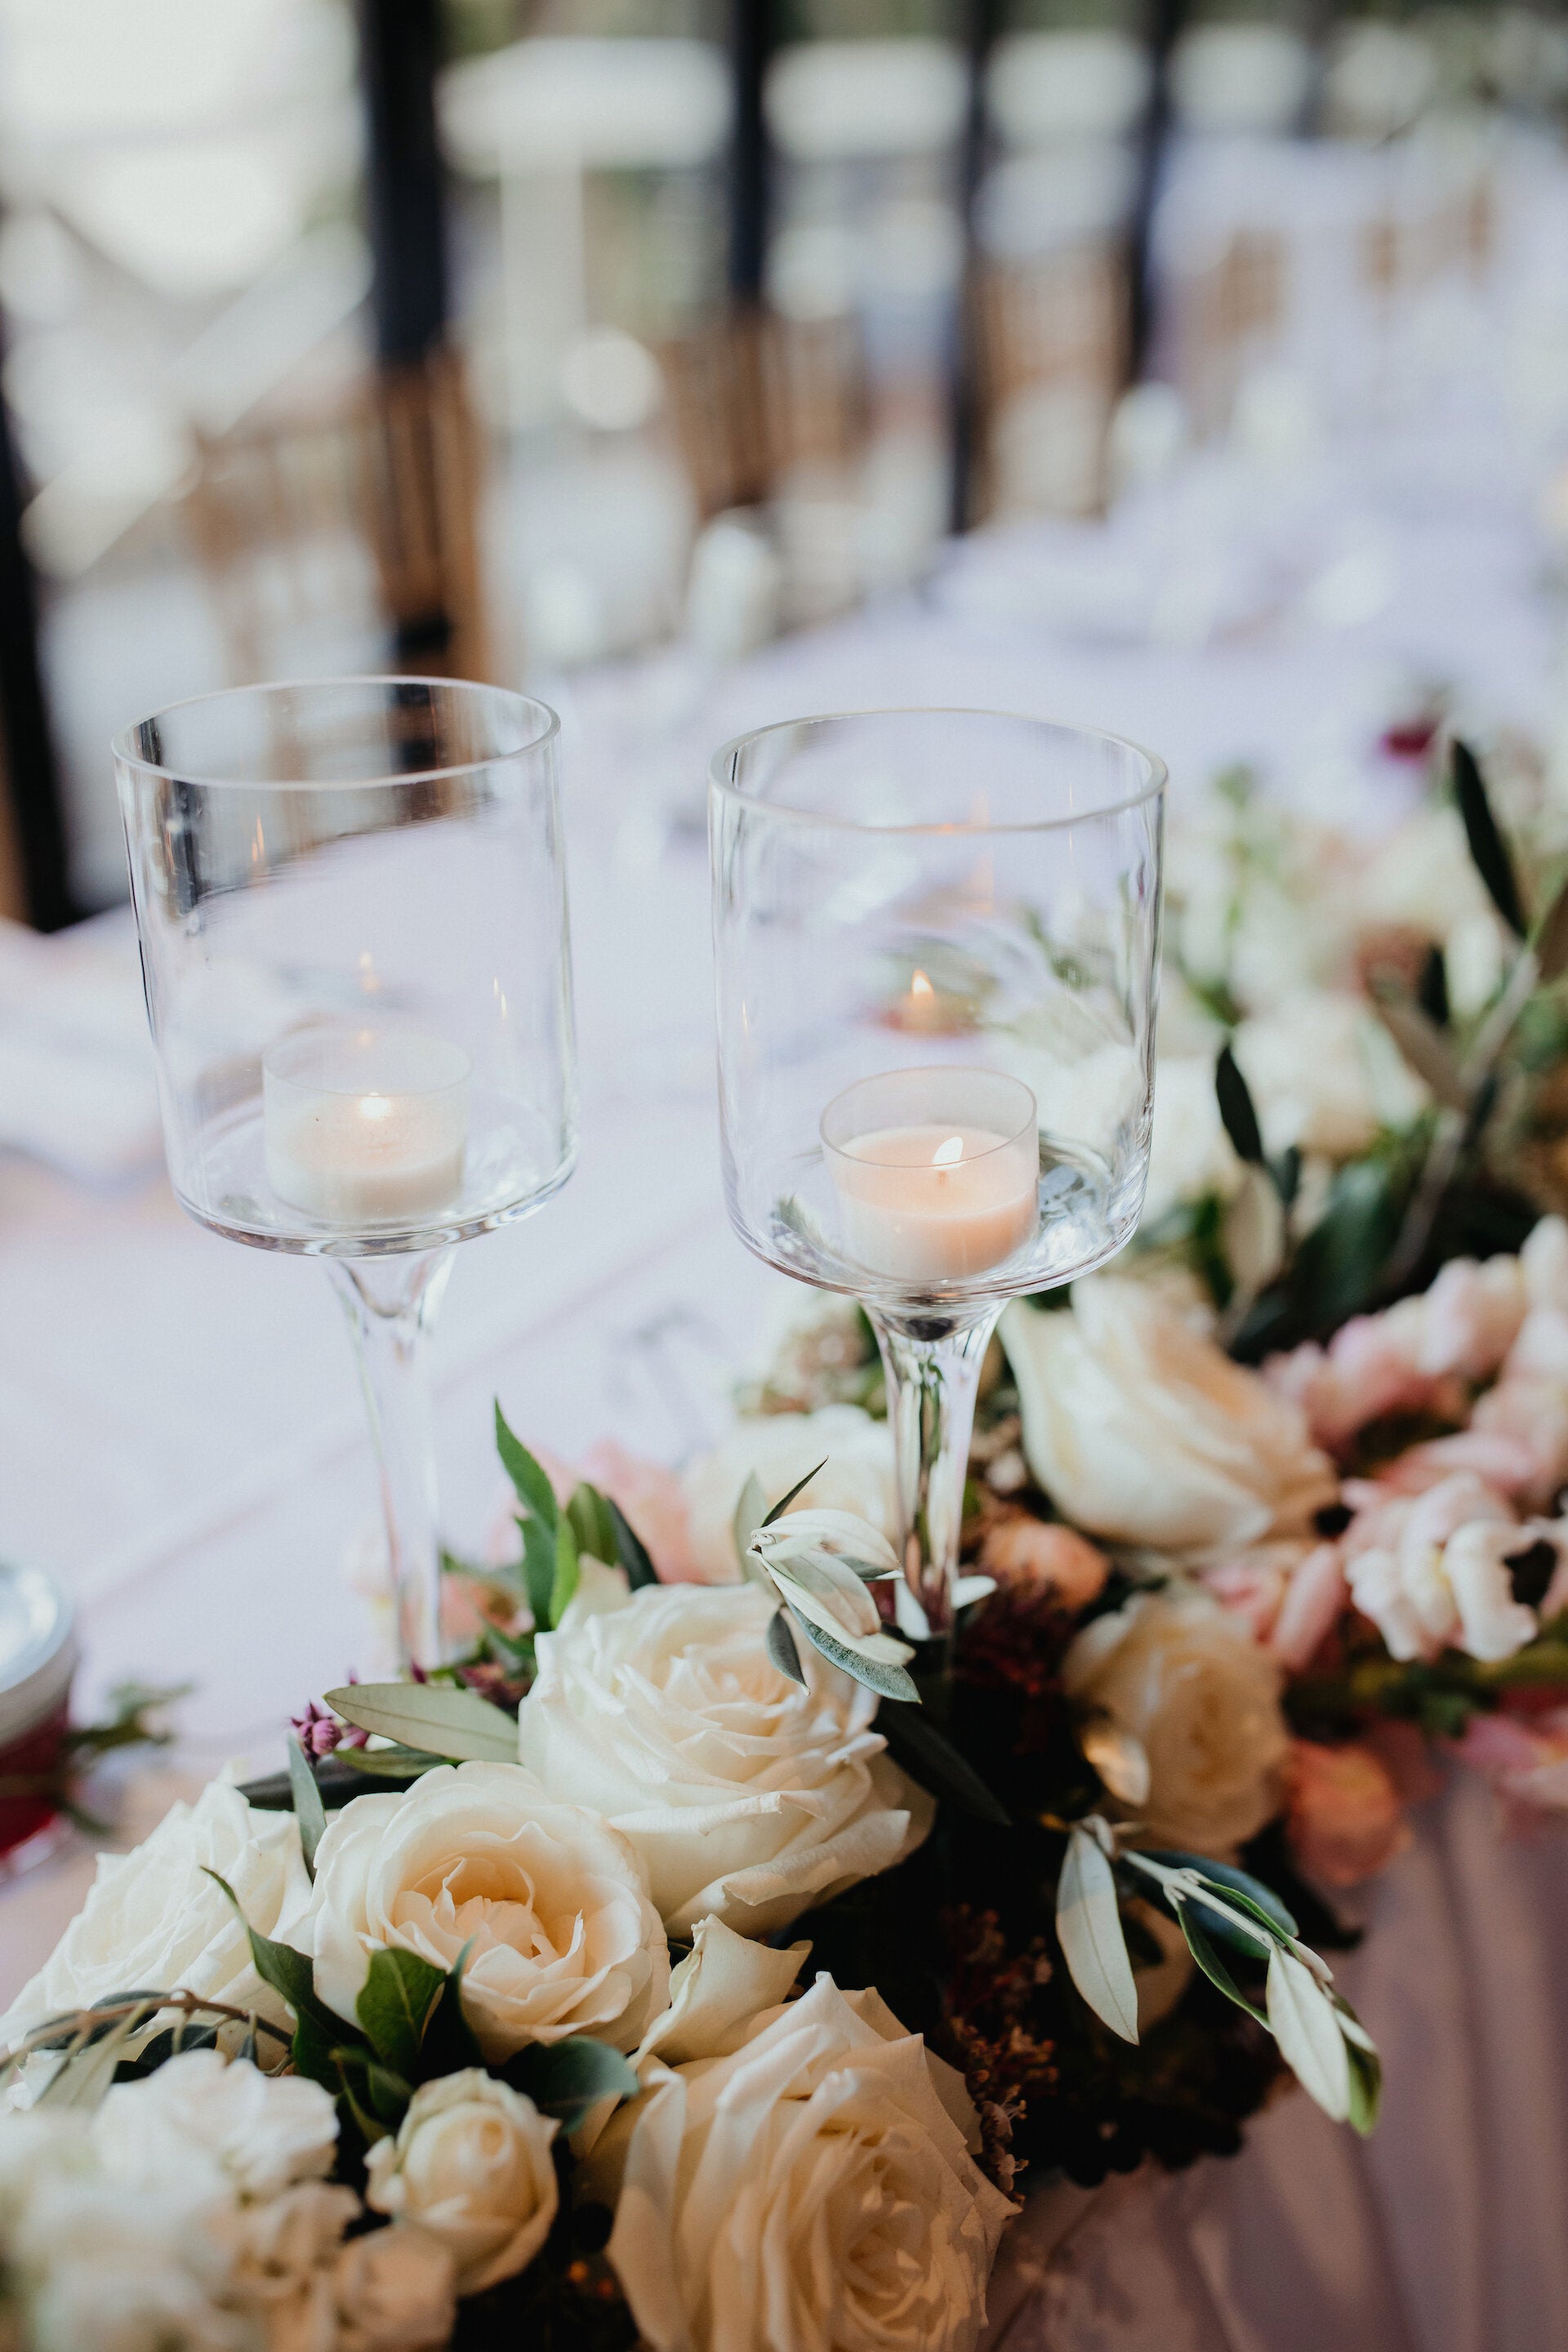 Bridal table floral garland with stem glass candleholders for a wedding reception at Pee Wees